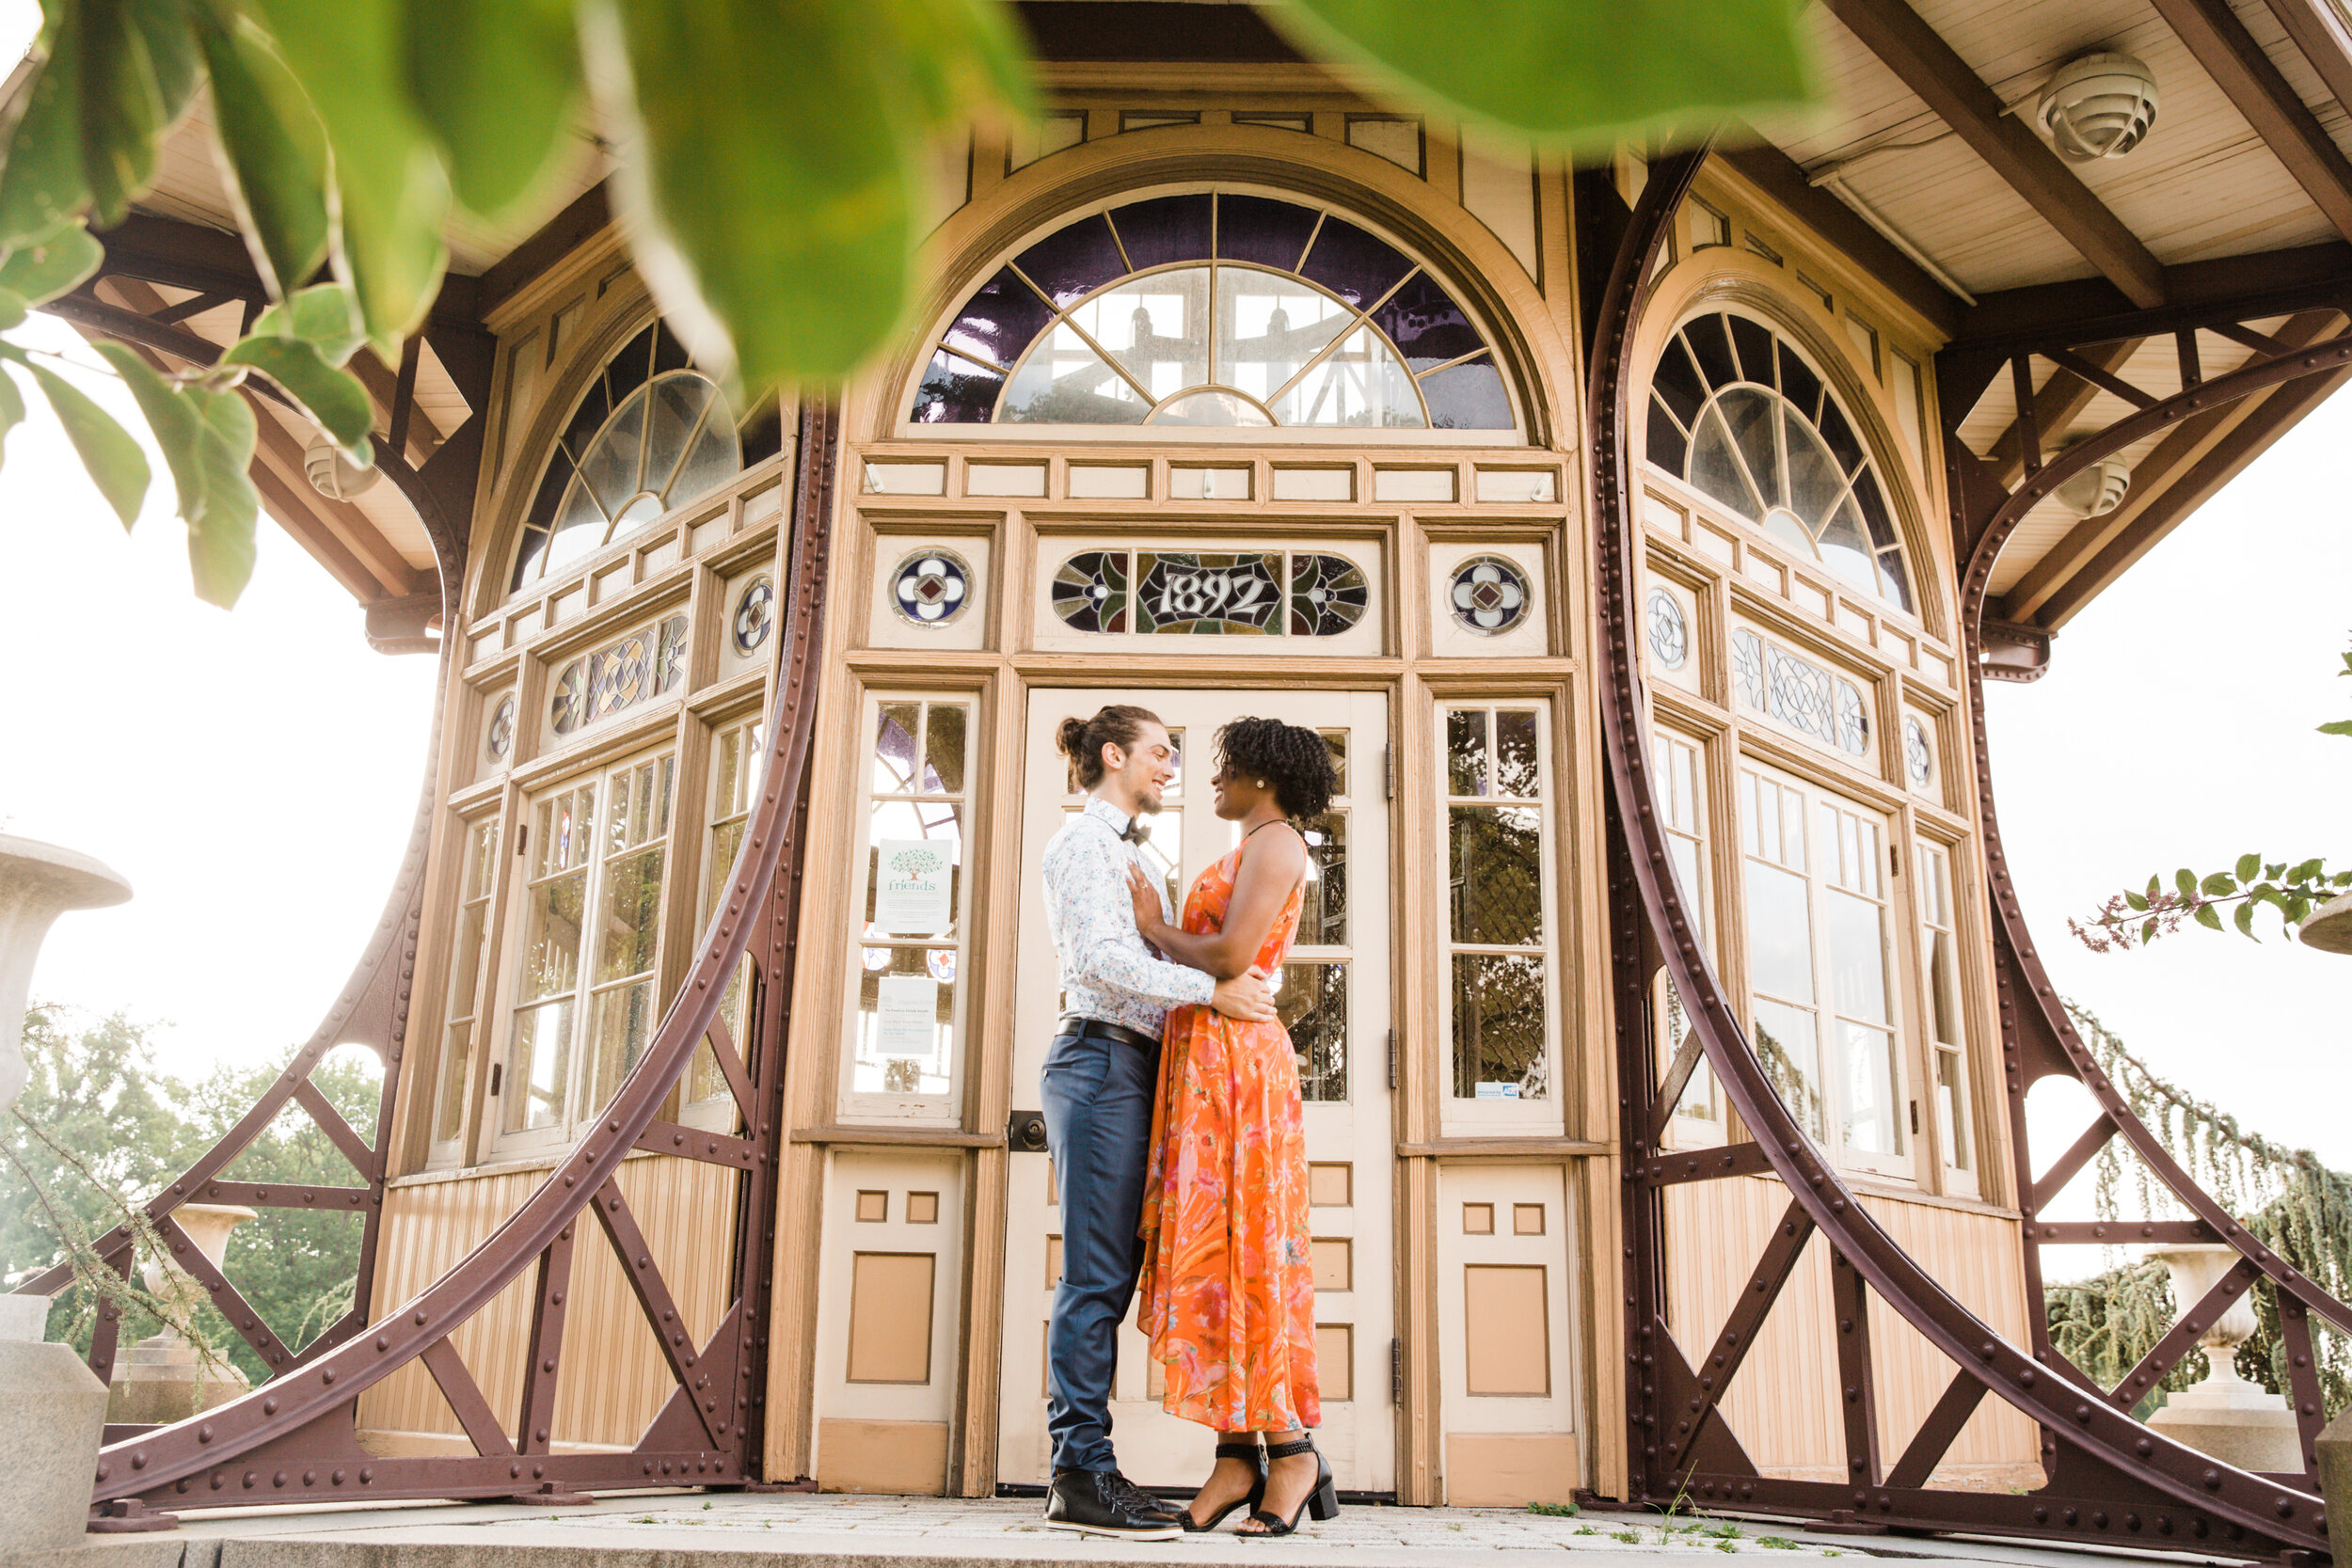 Golden Hour Engagement Session in Baltimore Maryland Patterson Park Pagoda DC Wedding Photographers Megapixels Media Photography and Videography Mixed Couple Multiracial Bride and Groom-2.jpg